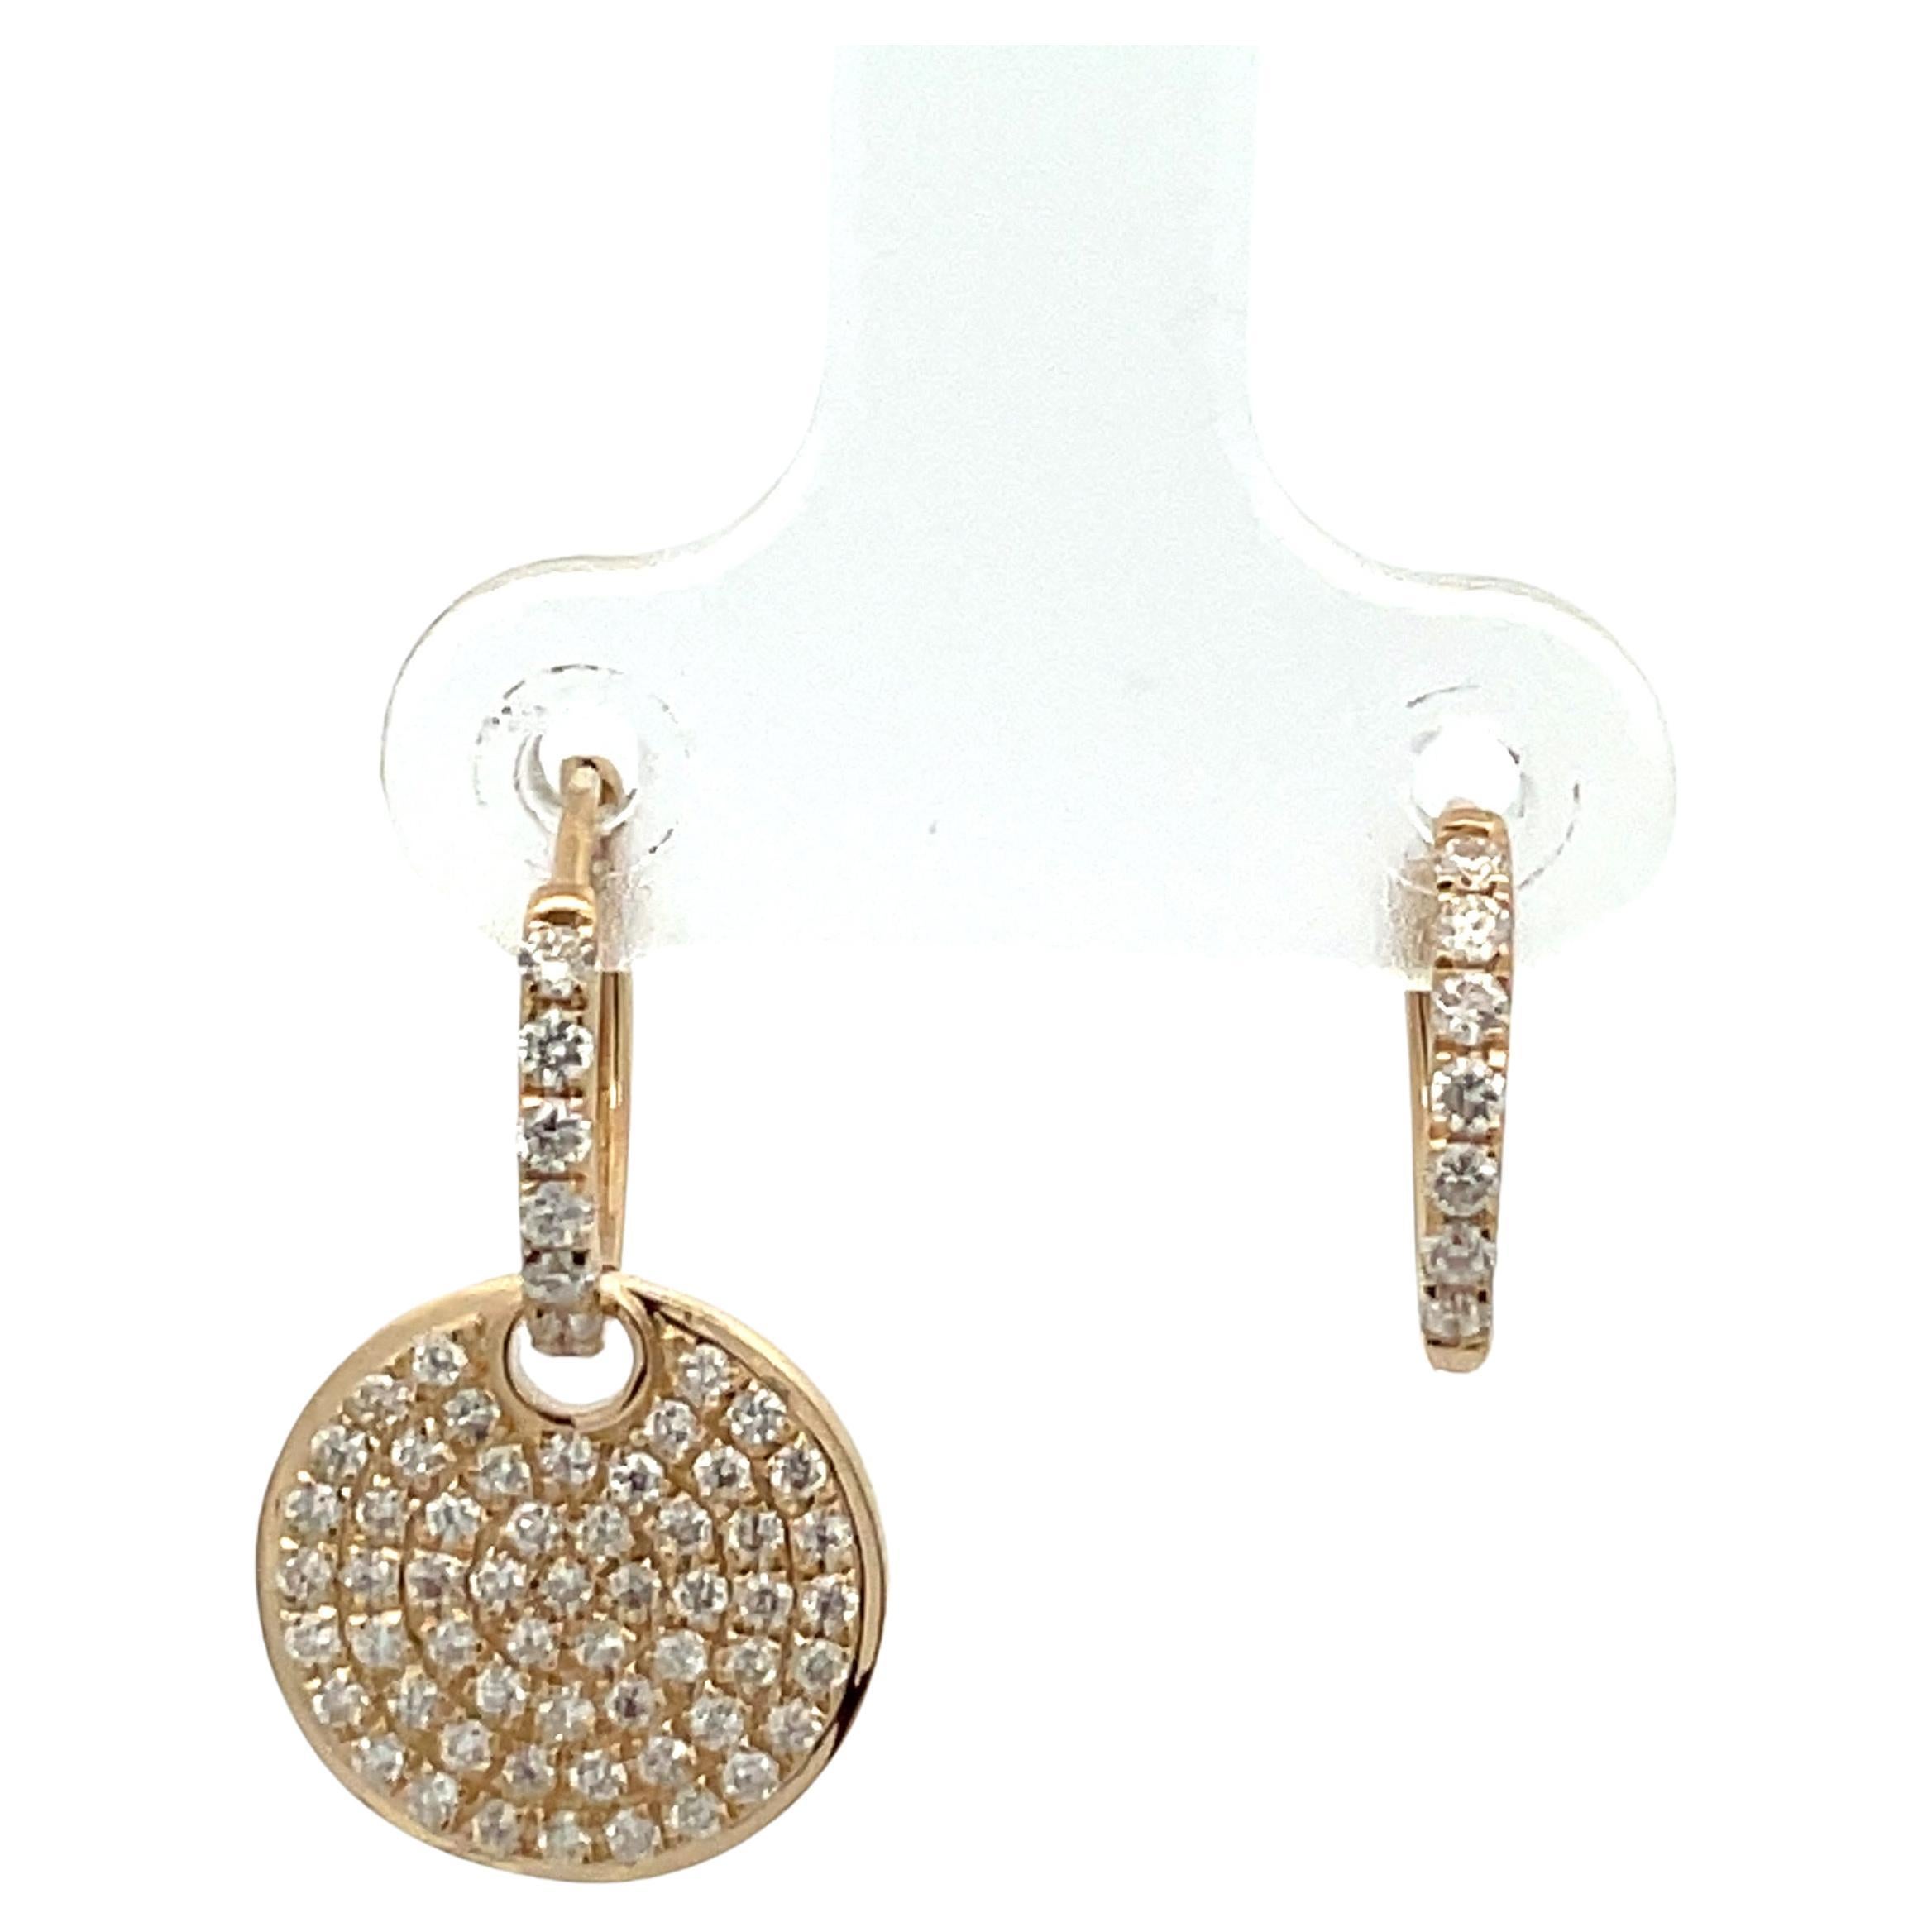 14 Karat yellow gold drop earrings featuring 126 round brilliants weighing 0.89 carats. The diamond disc can be removed to wear as just a diamond huggie hoop. 